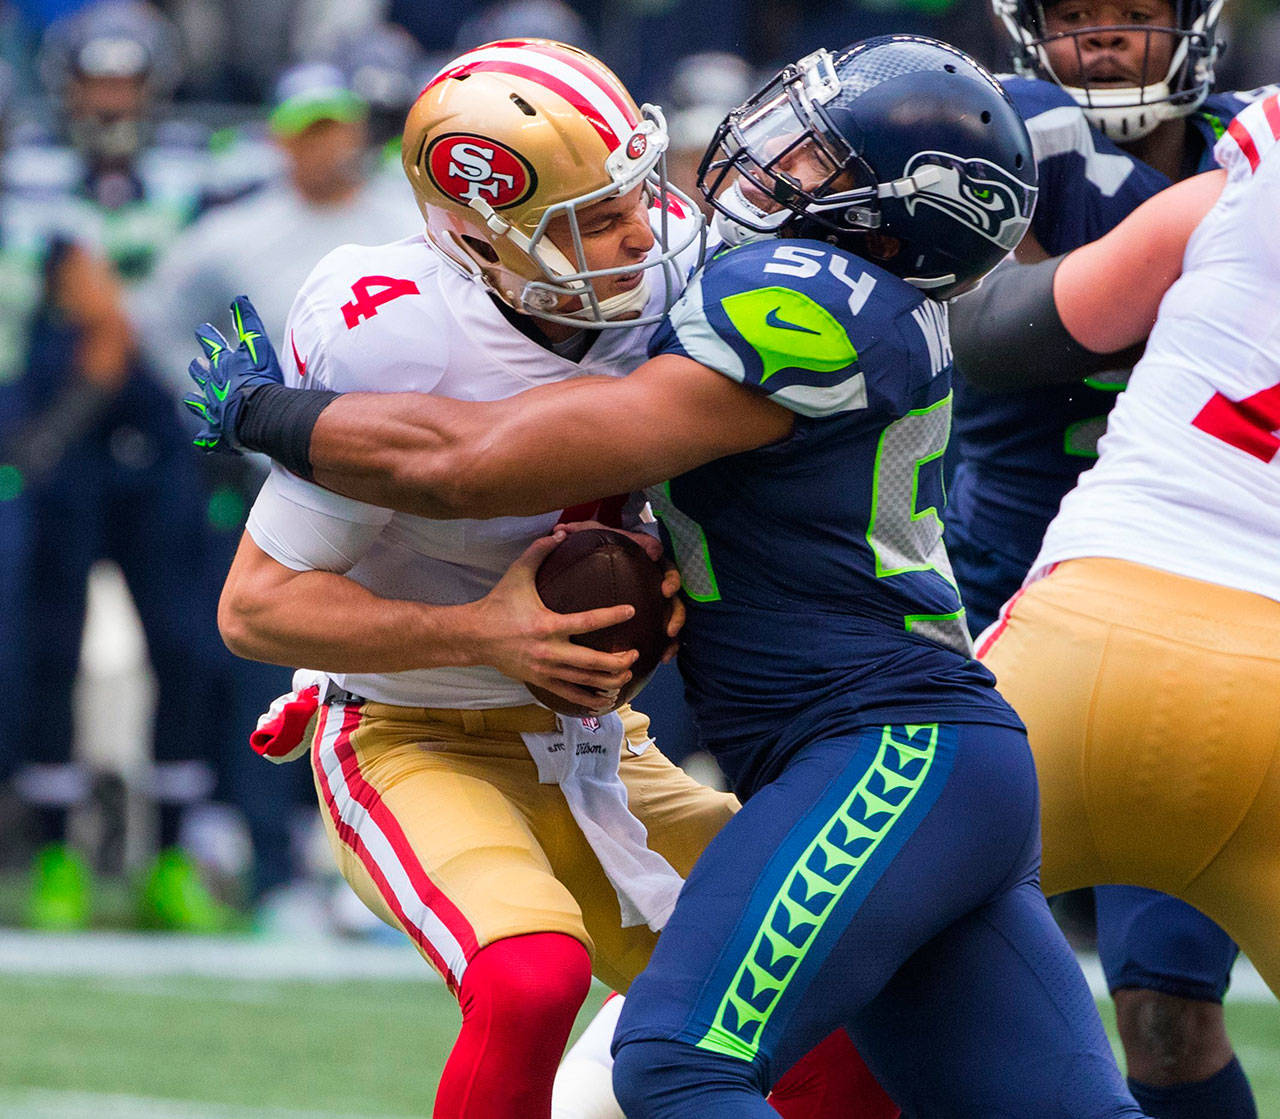 Seattle Seahawks middle linebacker Bobby Wagner (54) crushes and sacks San Francisco 49ers quarterback Nick Mullens (4) during first quarter action on Sunday, Dec. 2, 2018 at CenturyLink Field in Seattle, Wash. (Mike Siegel/Seattle Times/TNS)